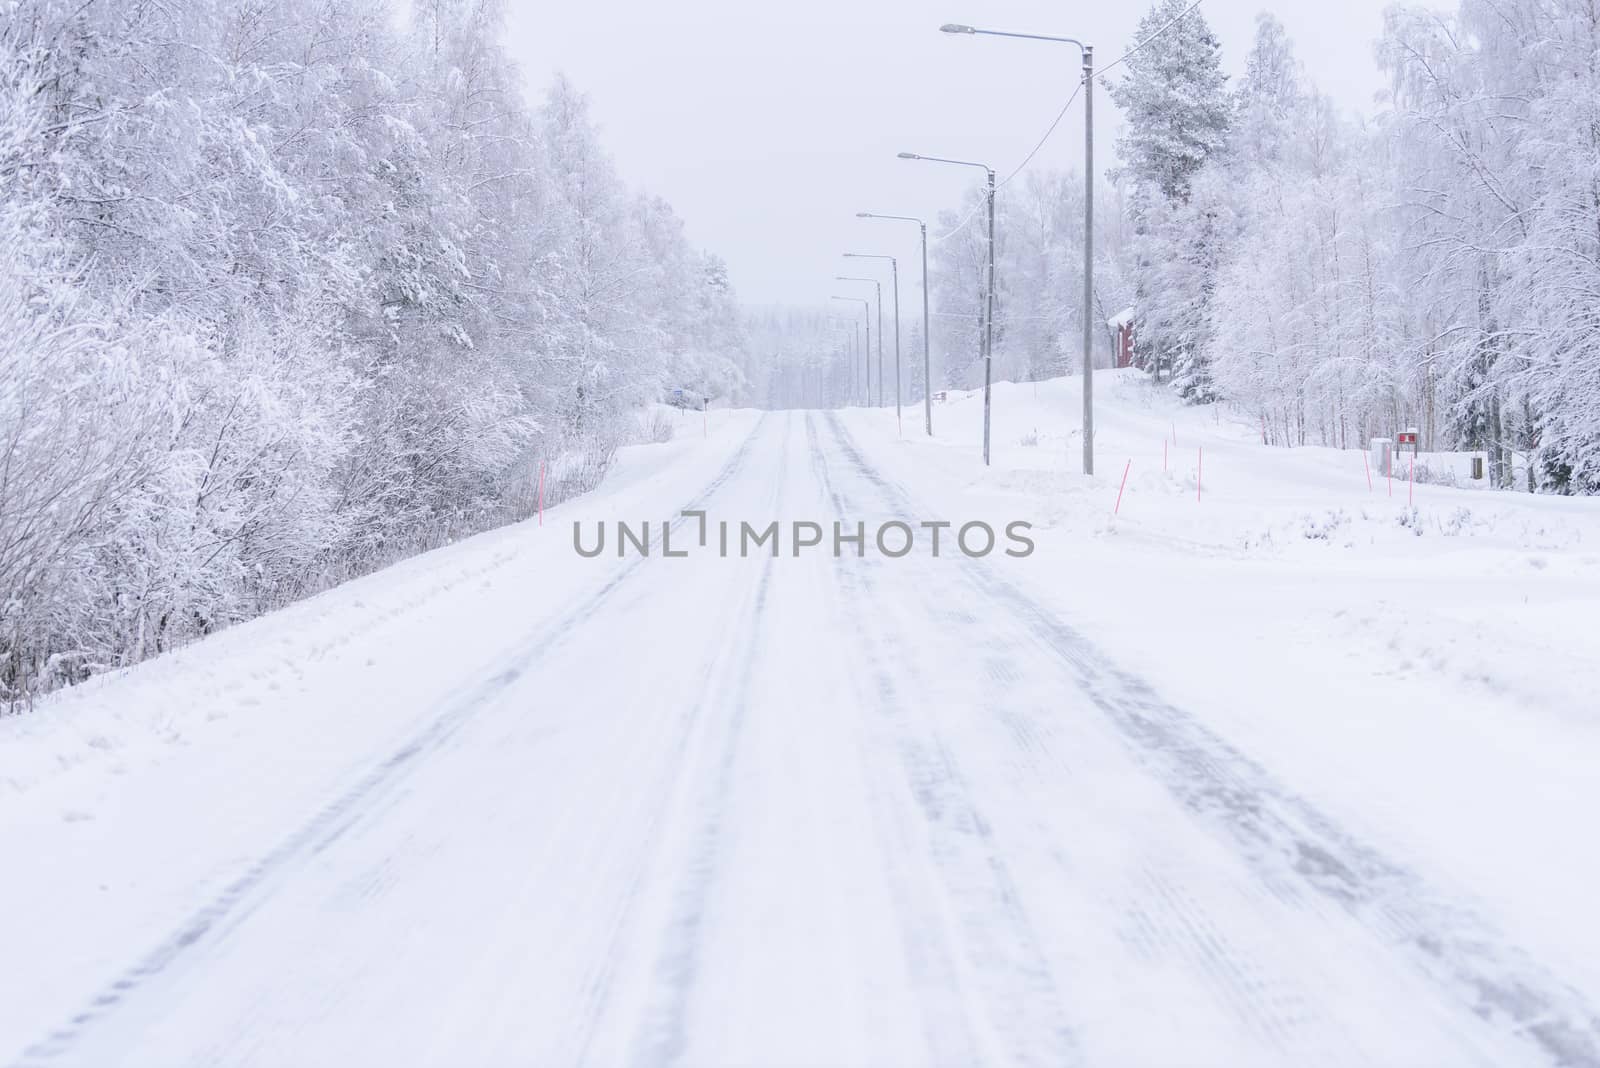 The road number 496  has covered with heavy snow in winter seaso by animagesdesign